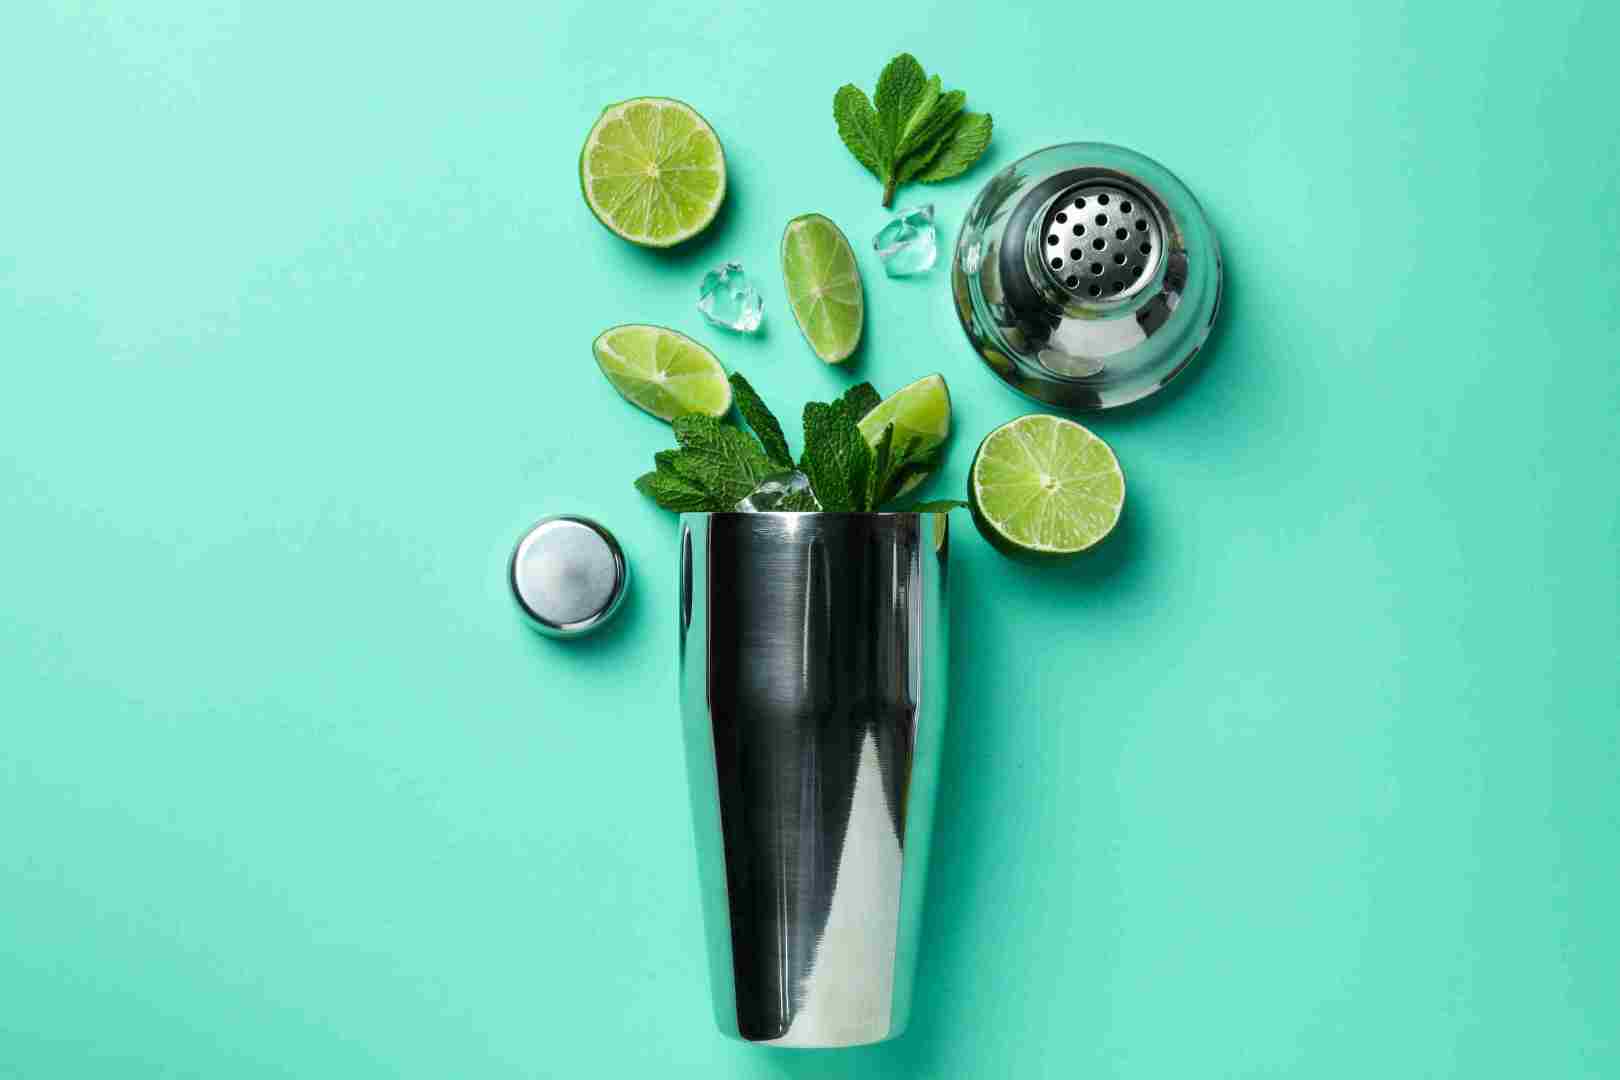 Mojito Recipe - The Forked Spoon